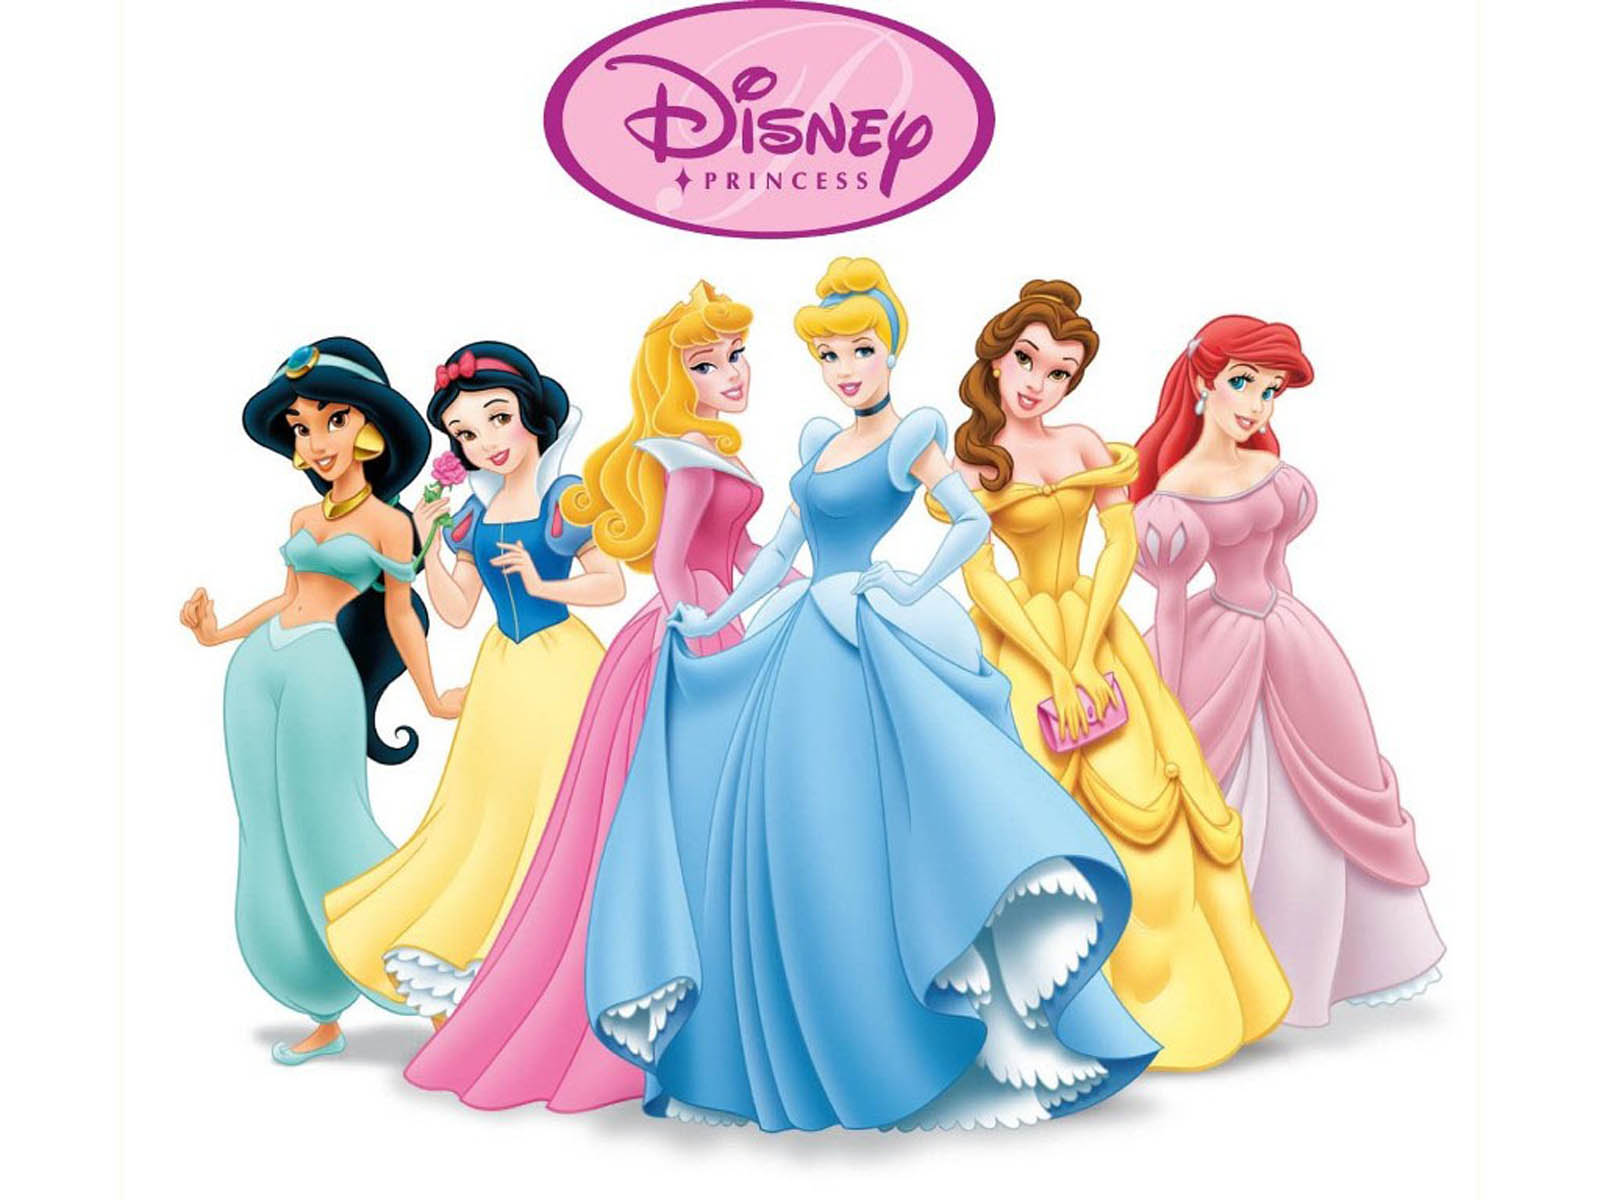 Tag Disney Princess Wallpapers BackgroundsPhotos Images and